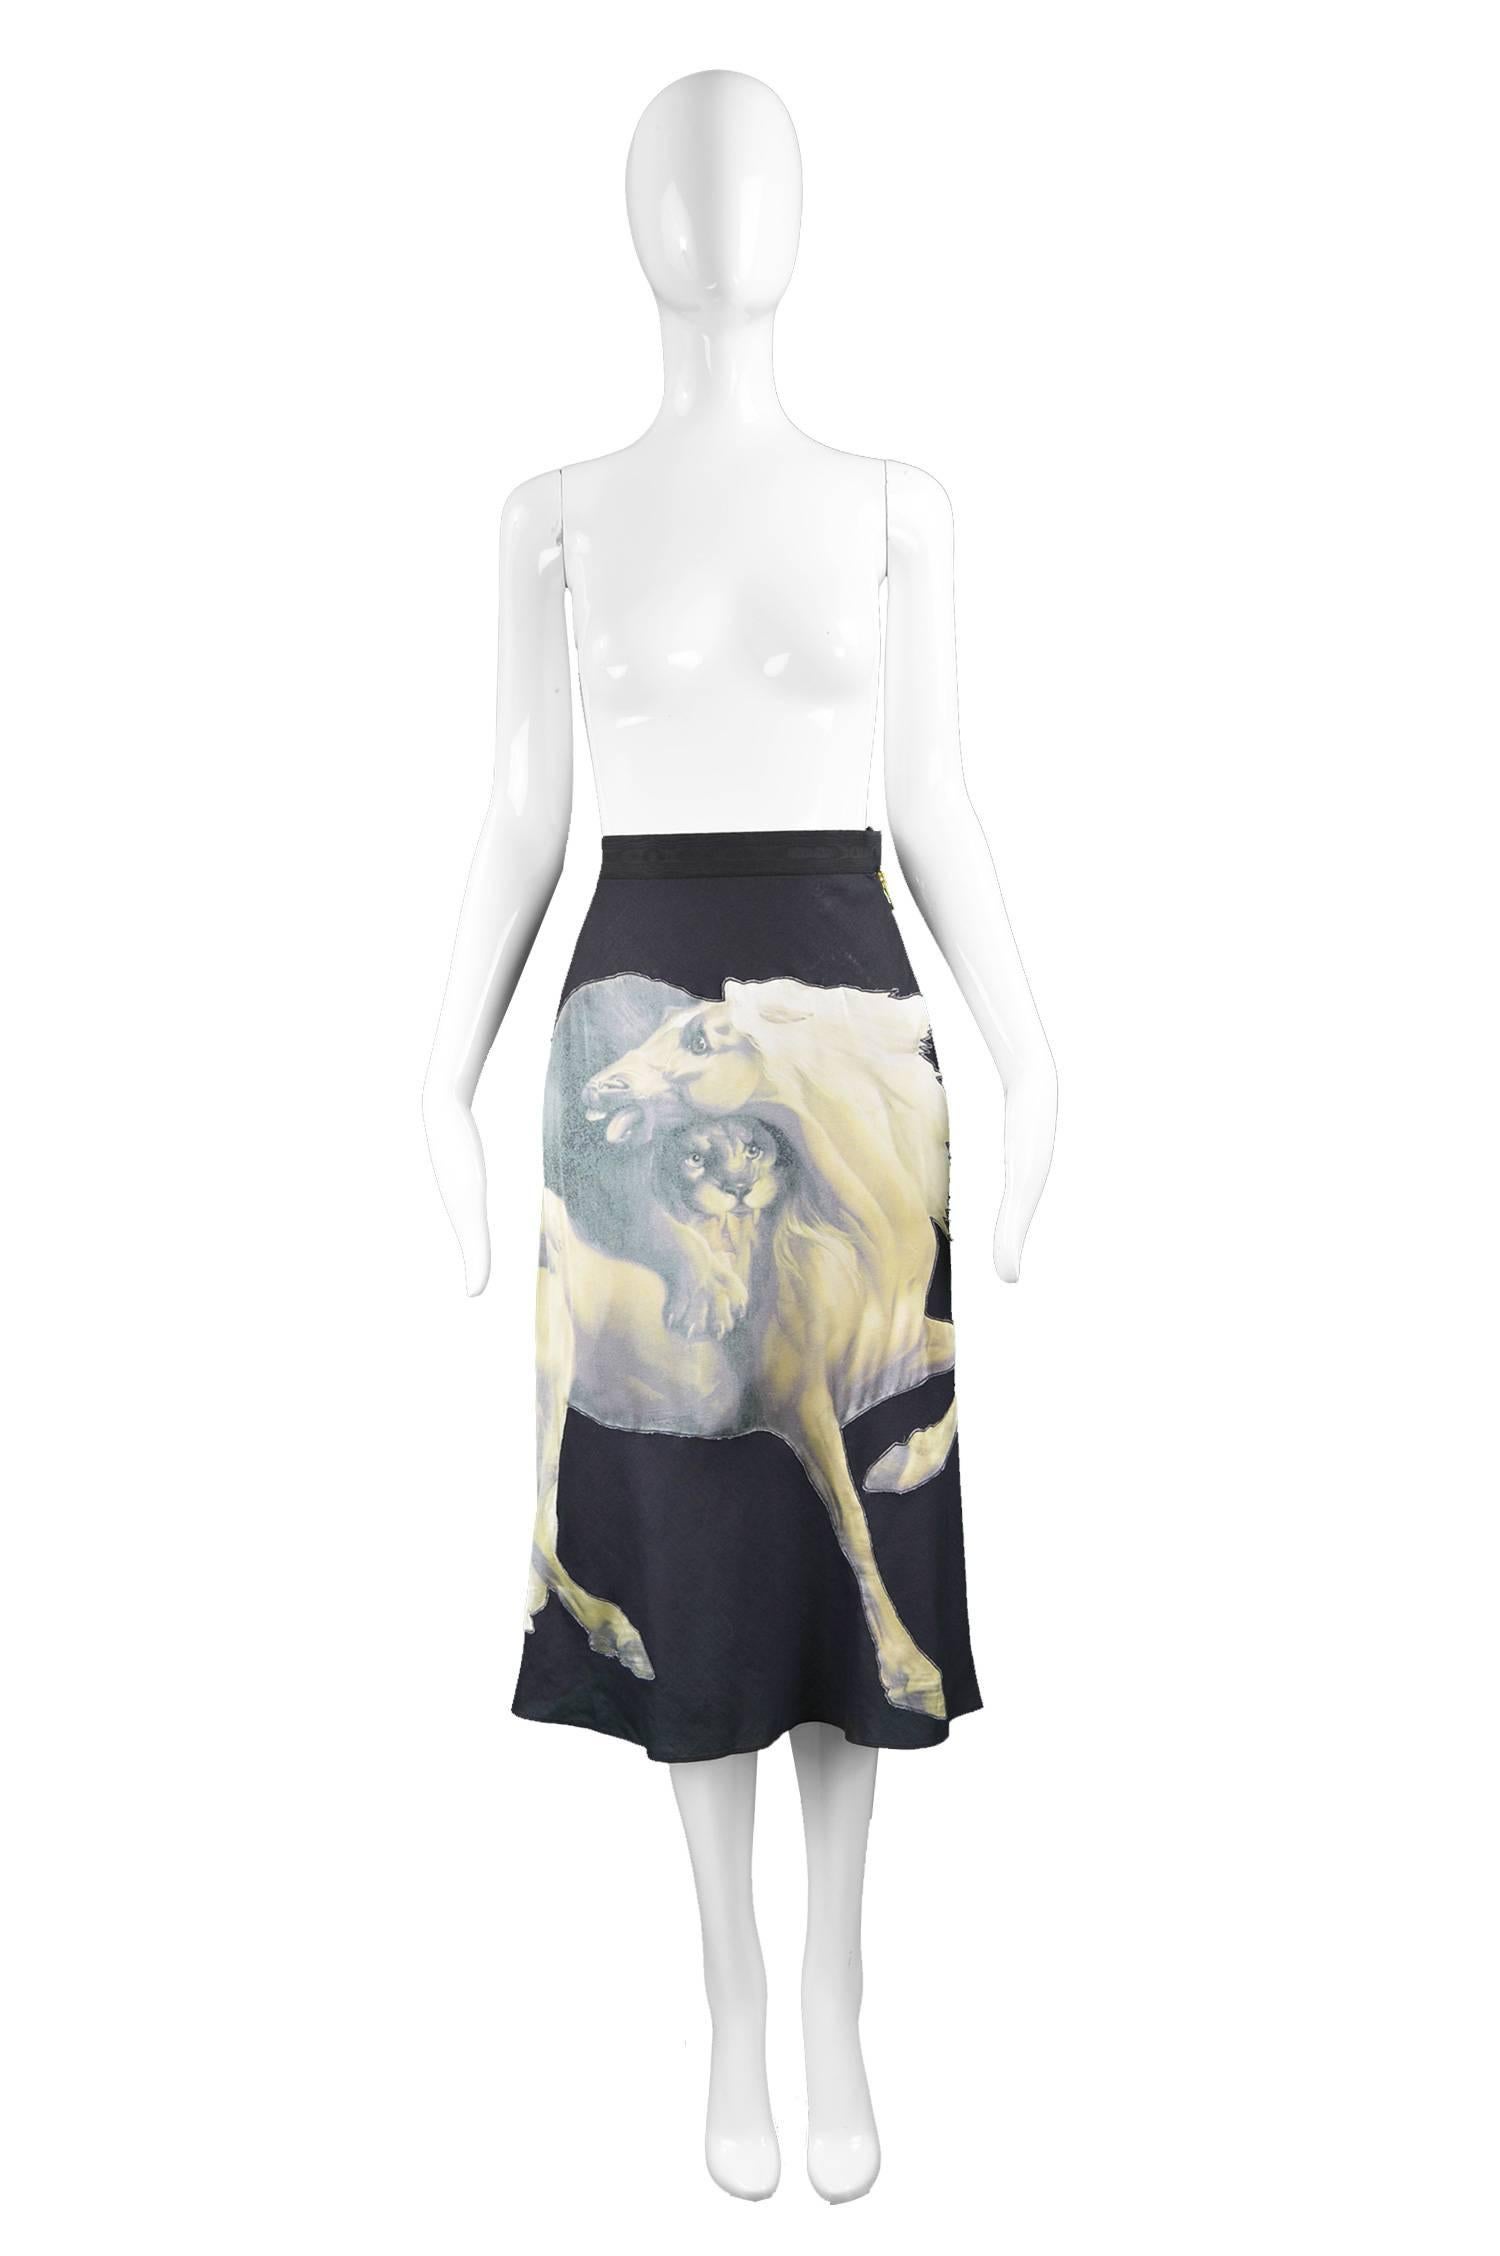 Chloé by Stella McCartney Skirt with George Stubbs Horse Appliqué, S/S 2001

Size: Label says 38 but fits more like a UK 6-8/ US 2-4. 
Waist - 25” / 63cm
Hips - 38” / 96cm
Length (Waist to Hem) - 31” / 79cm
 
Condition: Very Good preowned condition